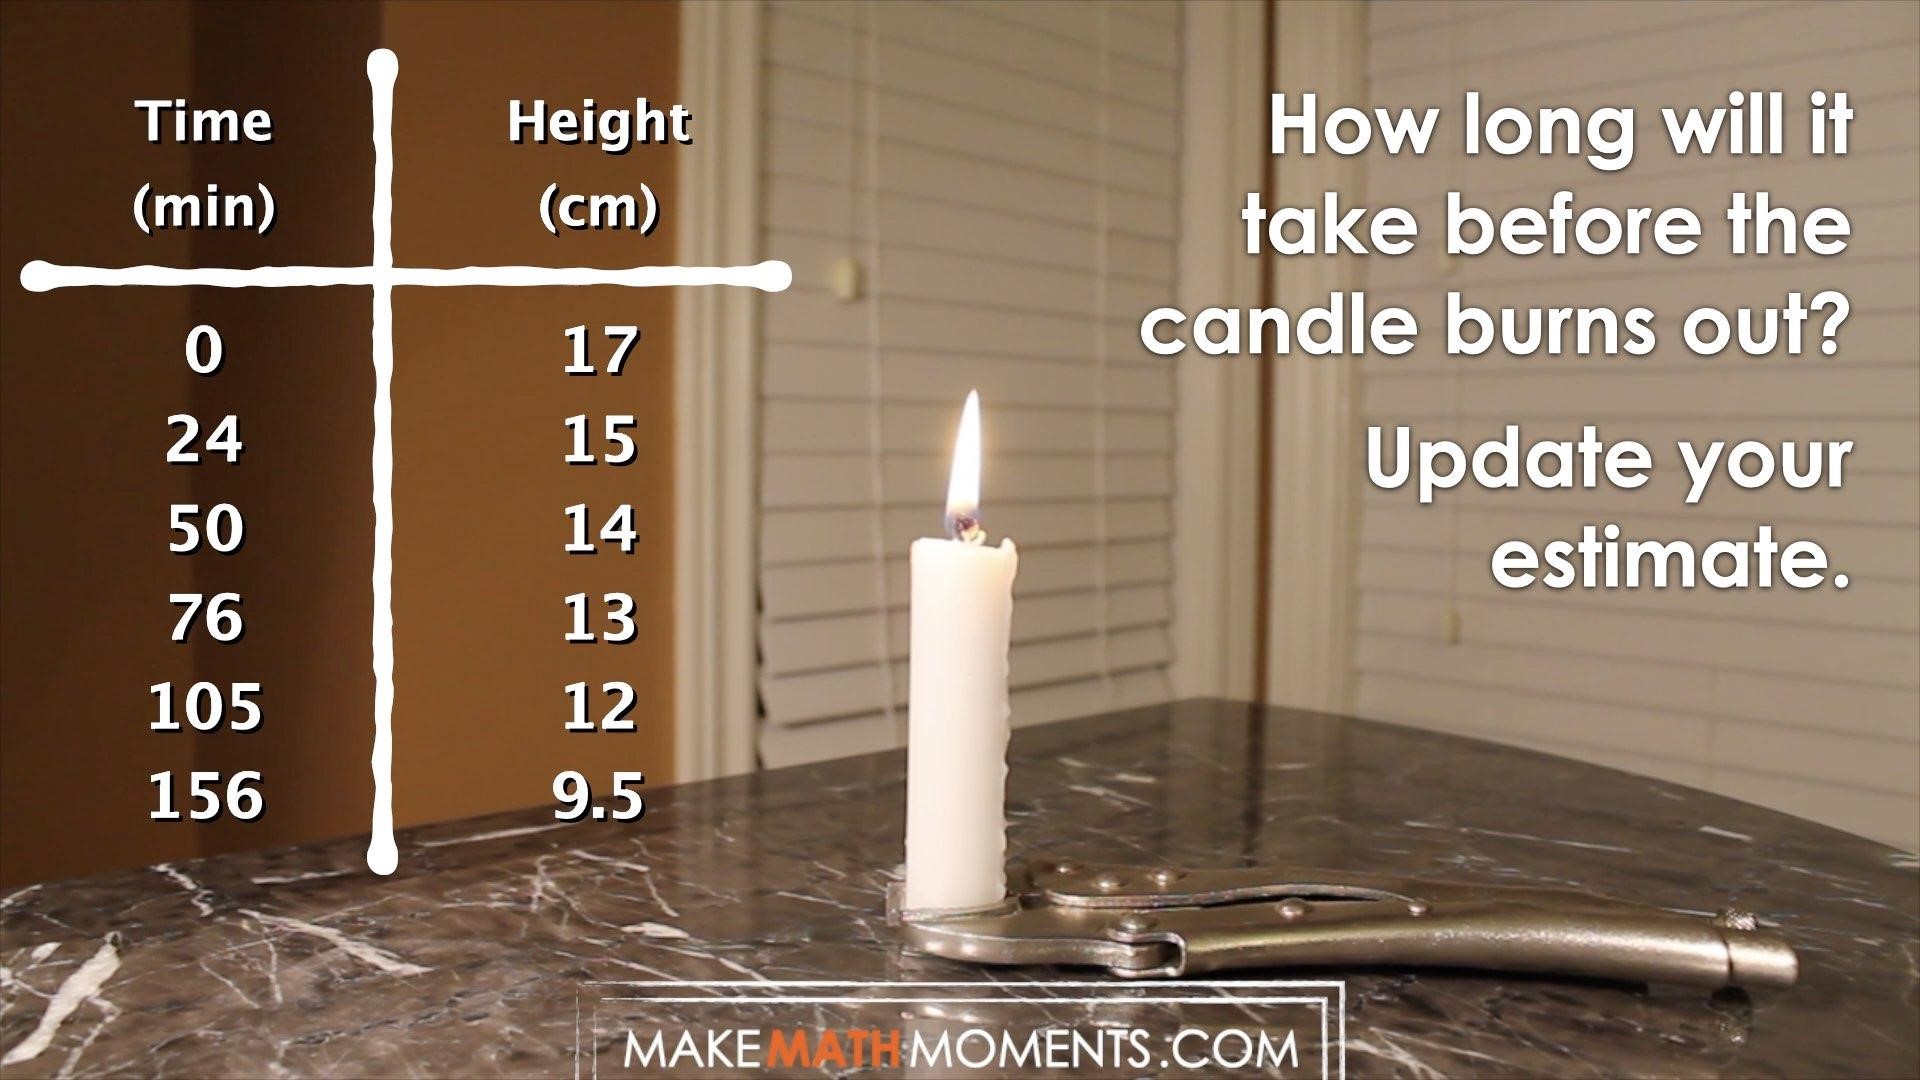 4 Laws Of Heat Management You Should Abide By When Making Candles